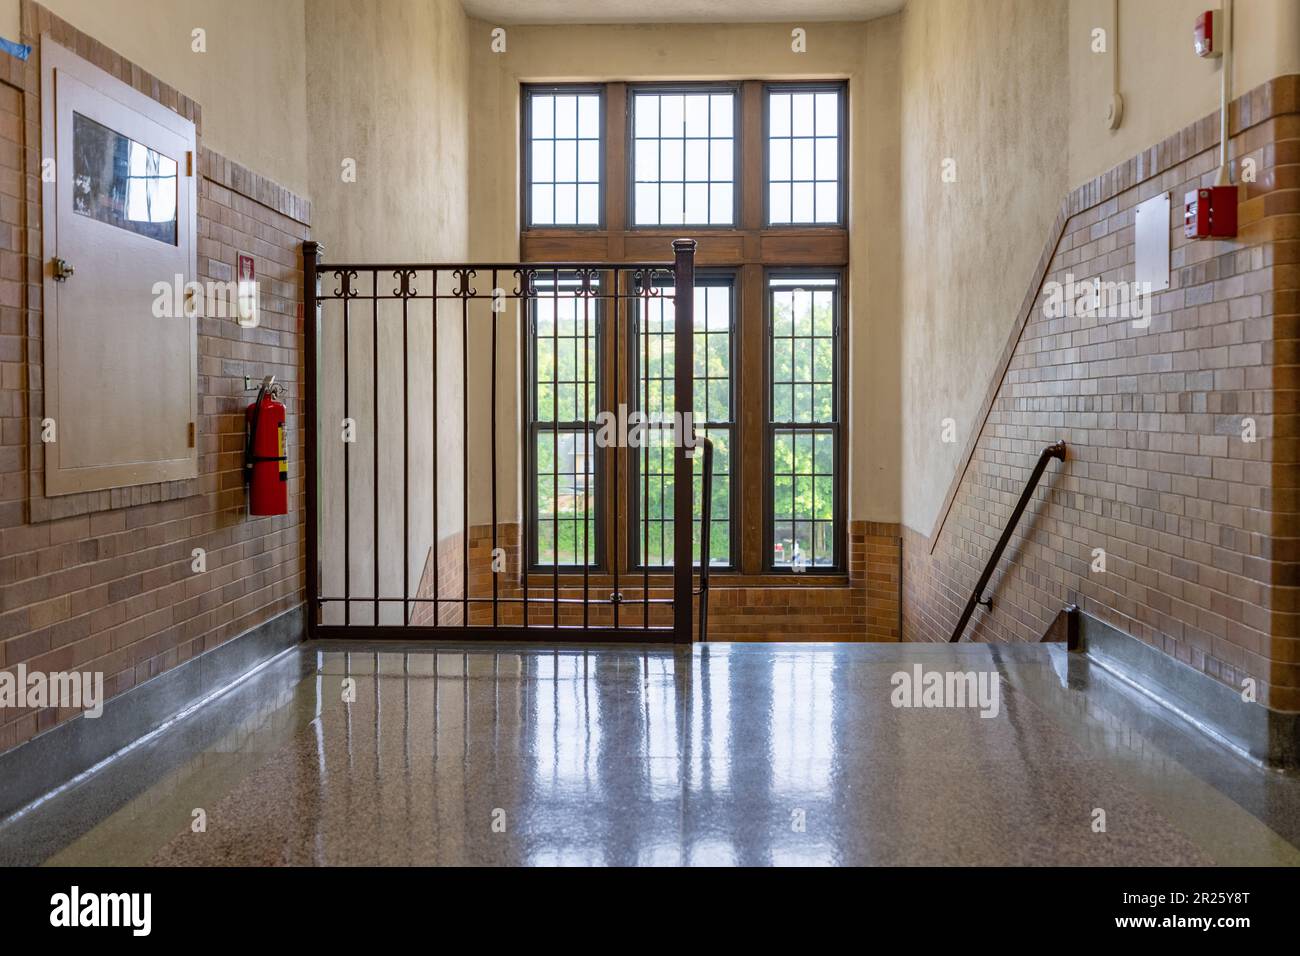 Nondescript stairway, hallway, with windows and brown railing, in a typical old US institutional building. Stock Photo